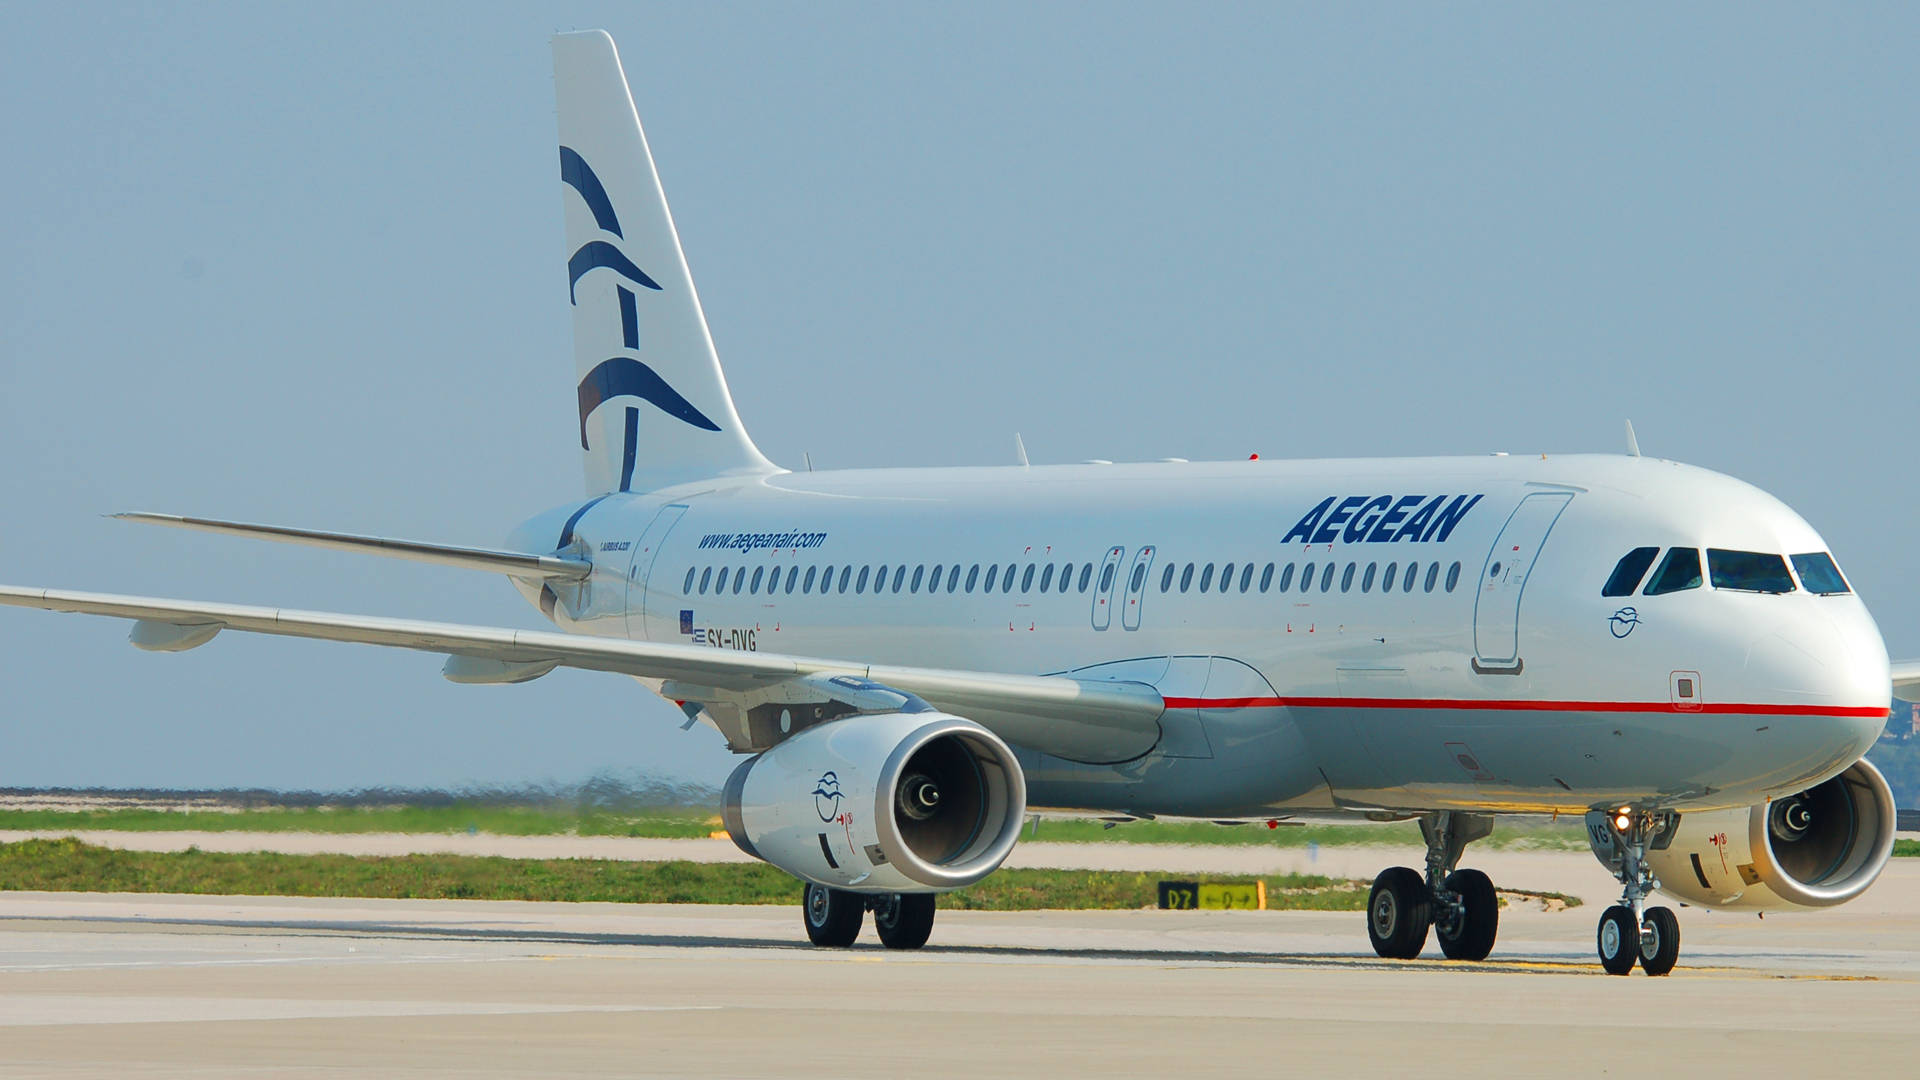 Taxiing Aegean Airlines Flag Carrier Airbus A320 Wallpaper